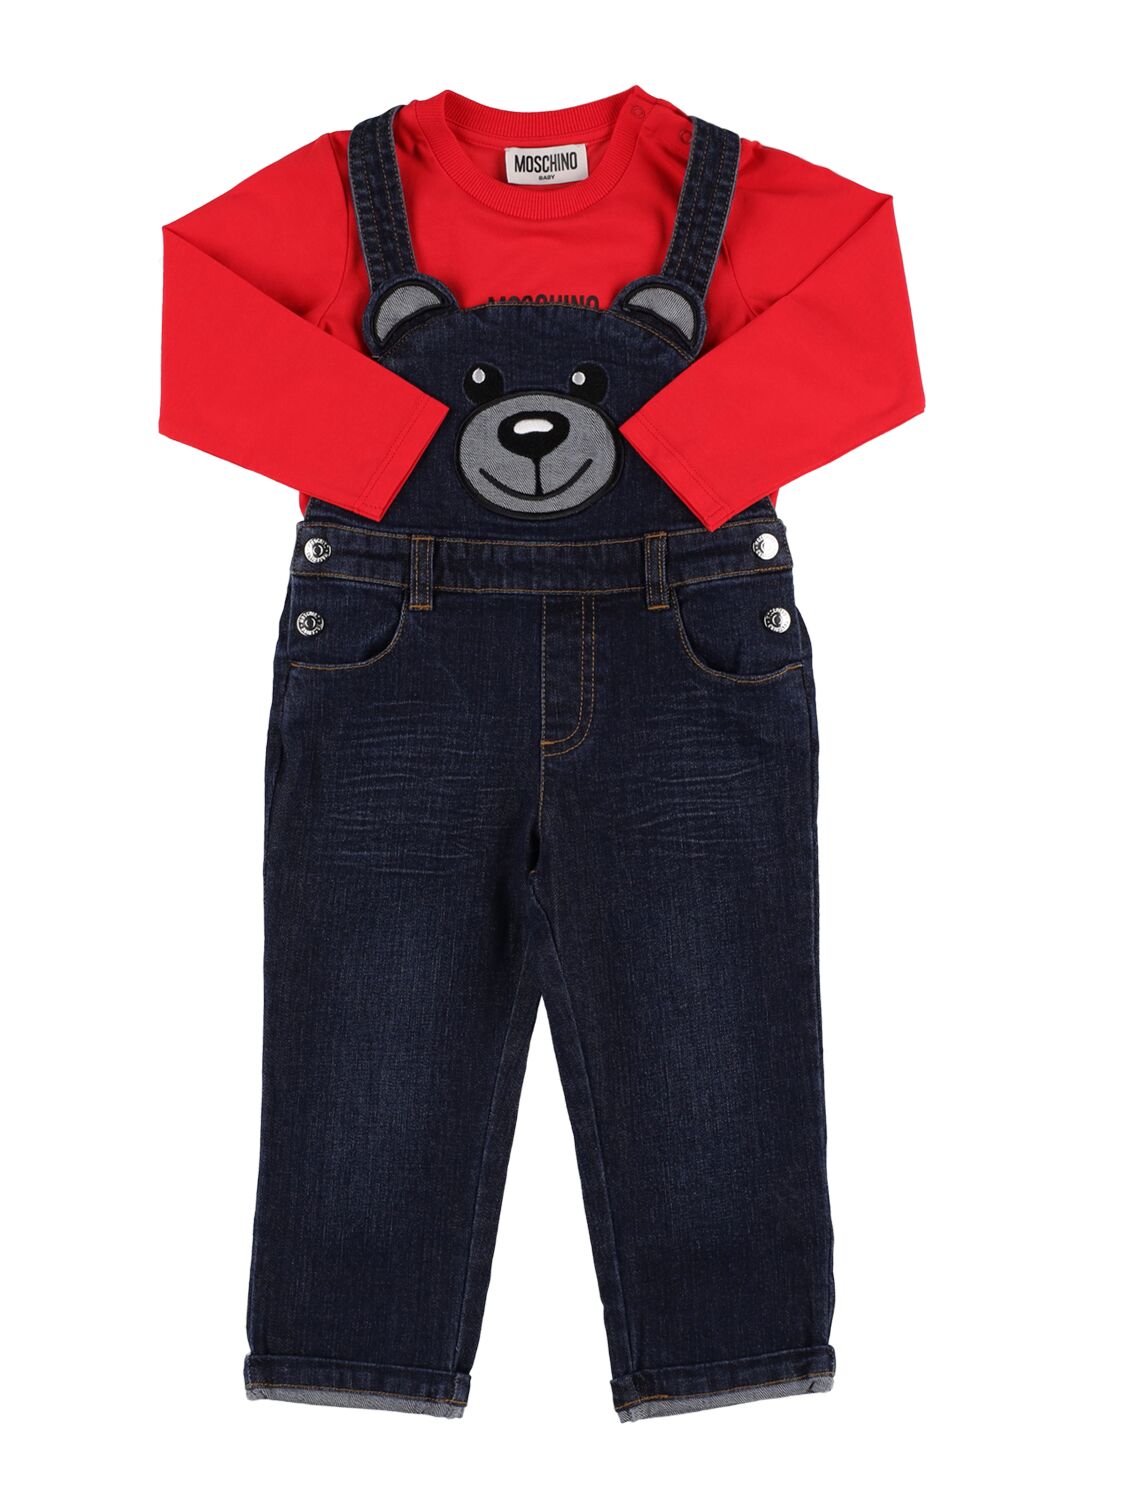 Moschino Kids' Cotton Jersey T-shirt & Denim Dungarees In Red